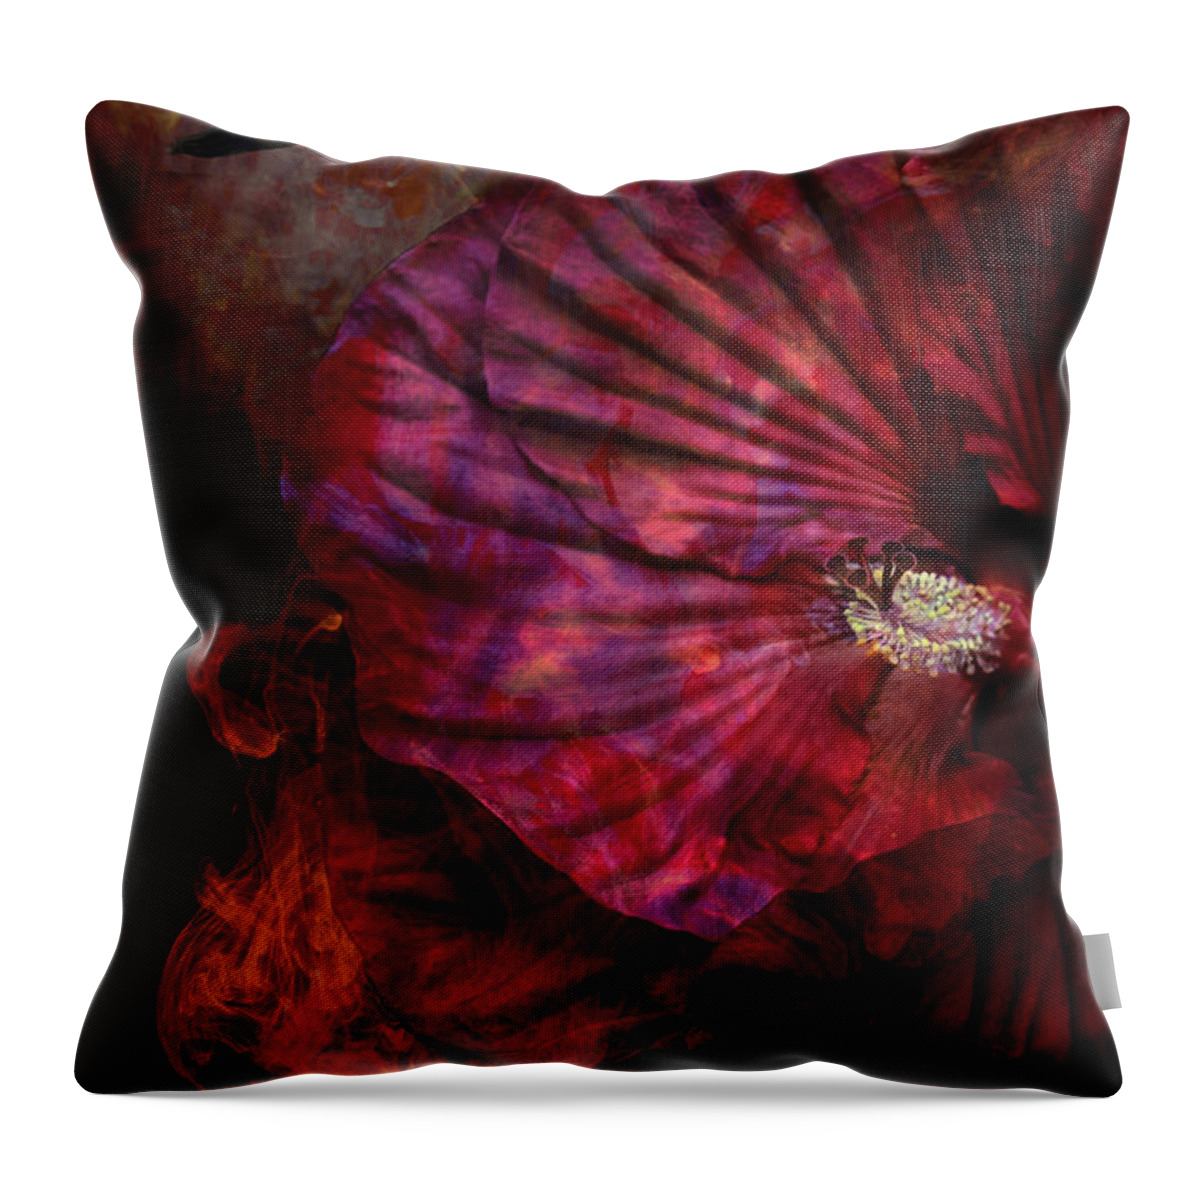 Hibiscus Throw Pillow featuring the photograph The Only Show In Town by Cynthia Dickinson